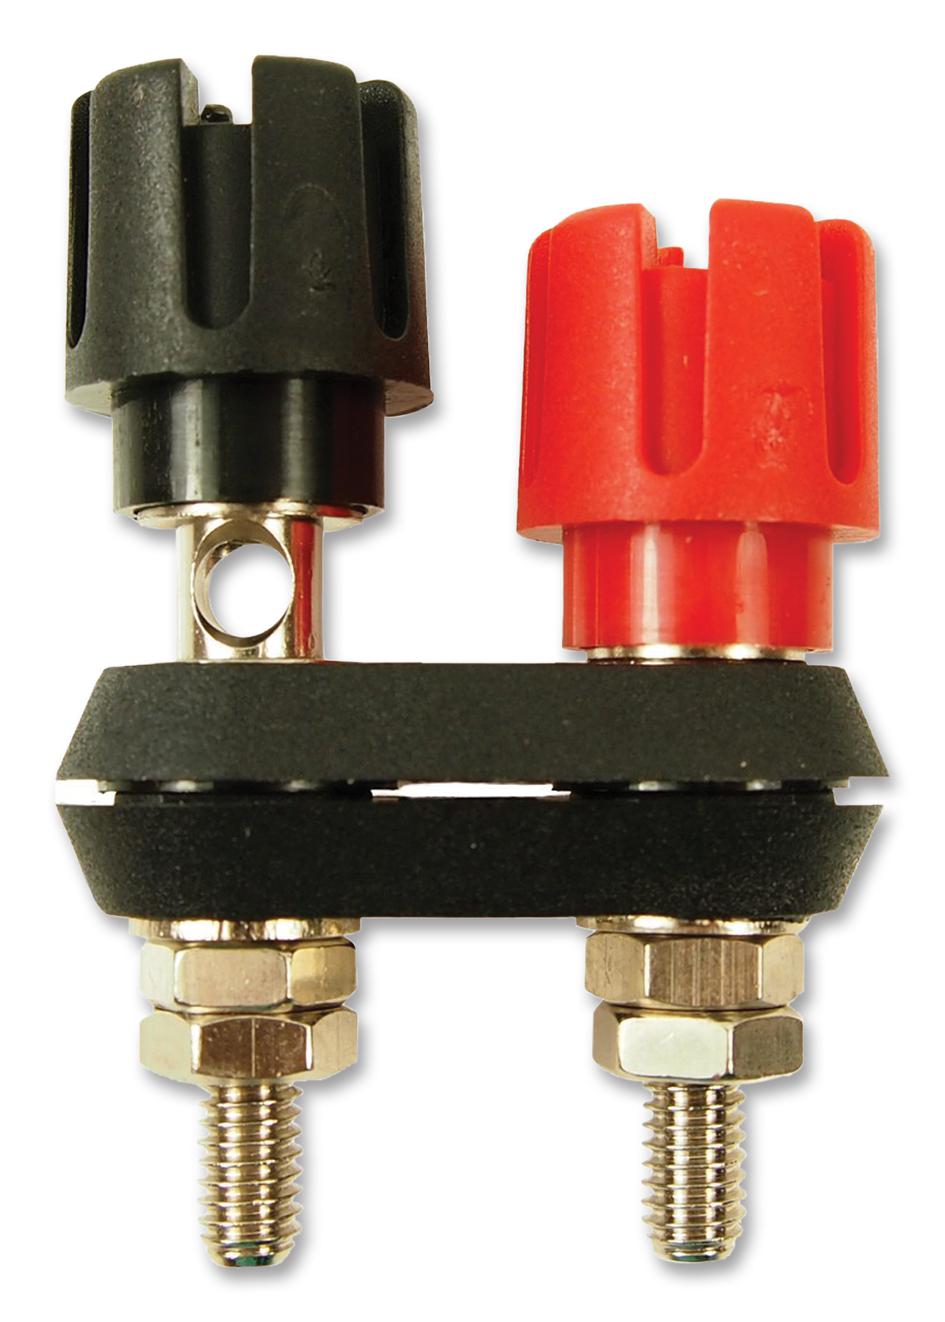 CL159701 BINDING POST, BLK/RED, SCREW CLIFF ELECTRONIC COMPONENTS